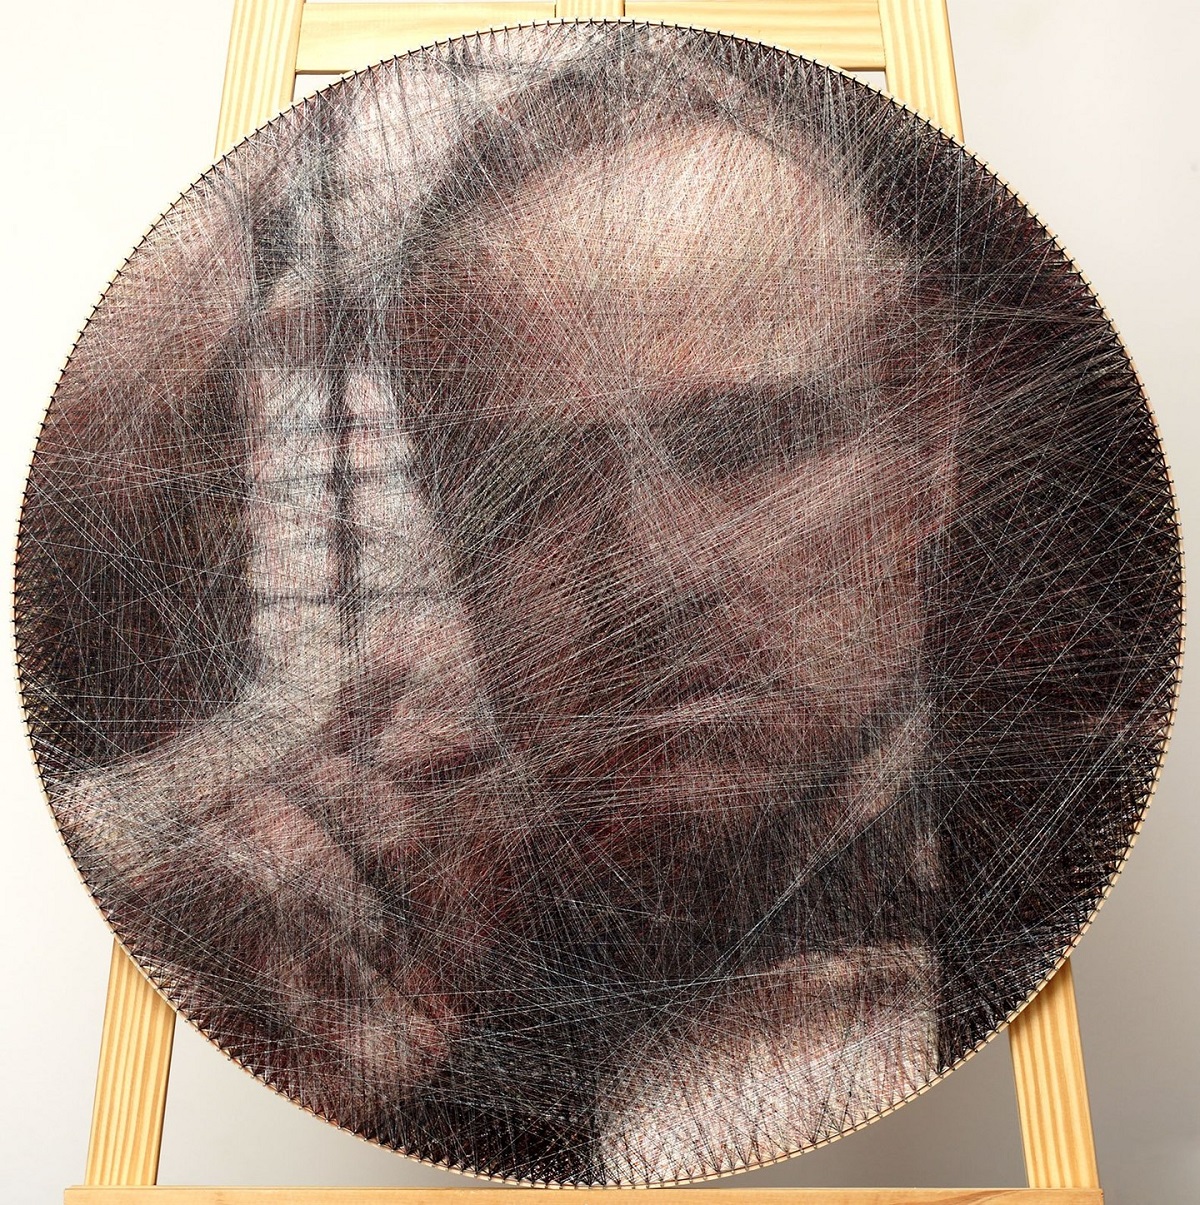 The String-Art Portrait Of Marlon Brando As Don Vito Corleone, From The Great Movie "The Godfather" (1972)